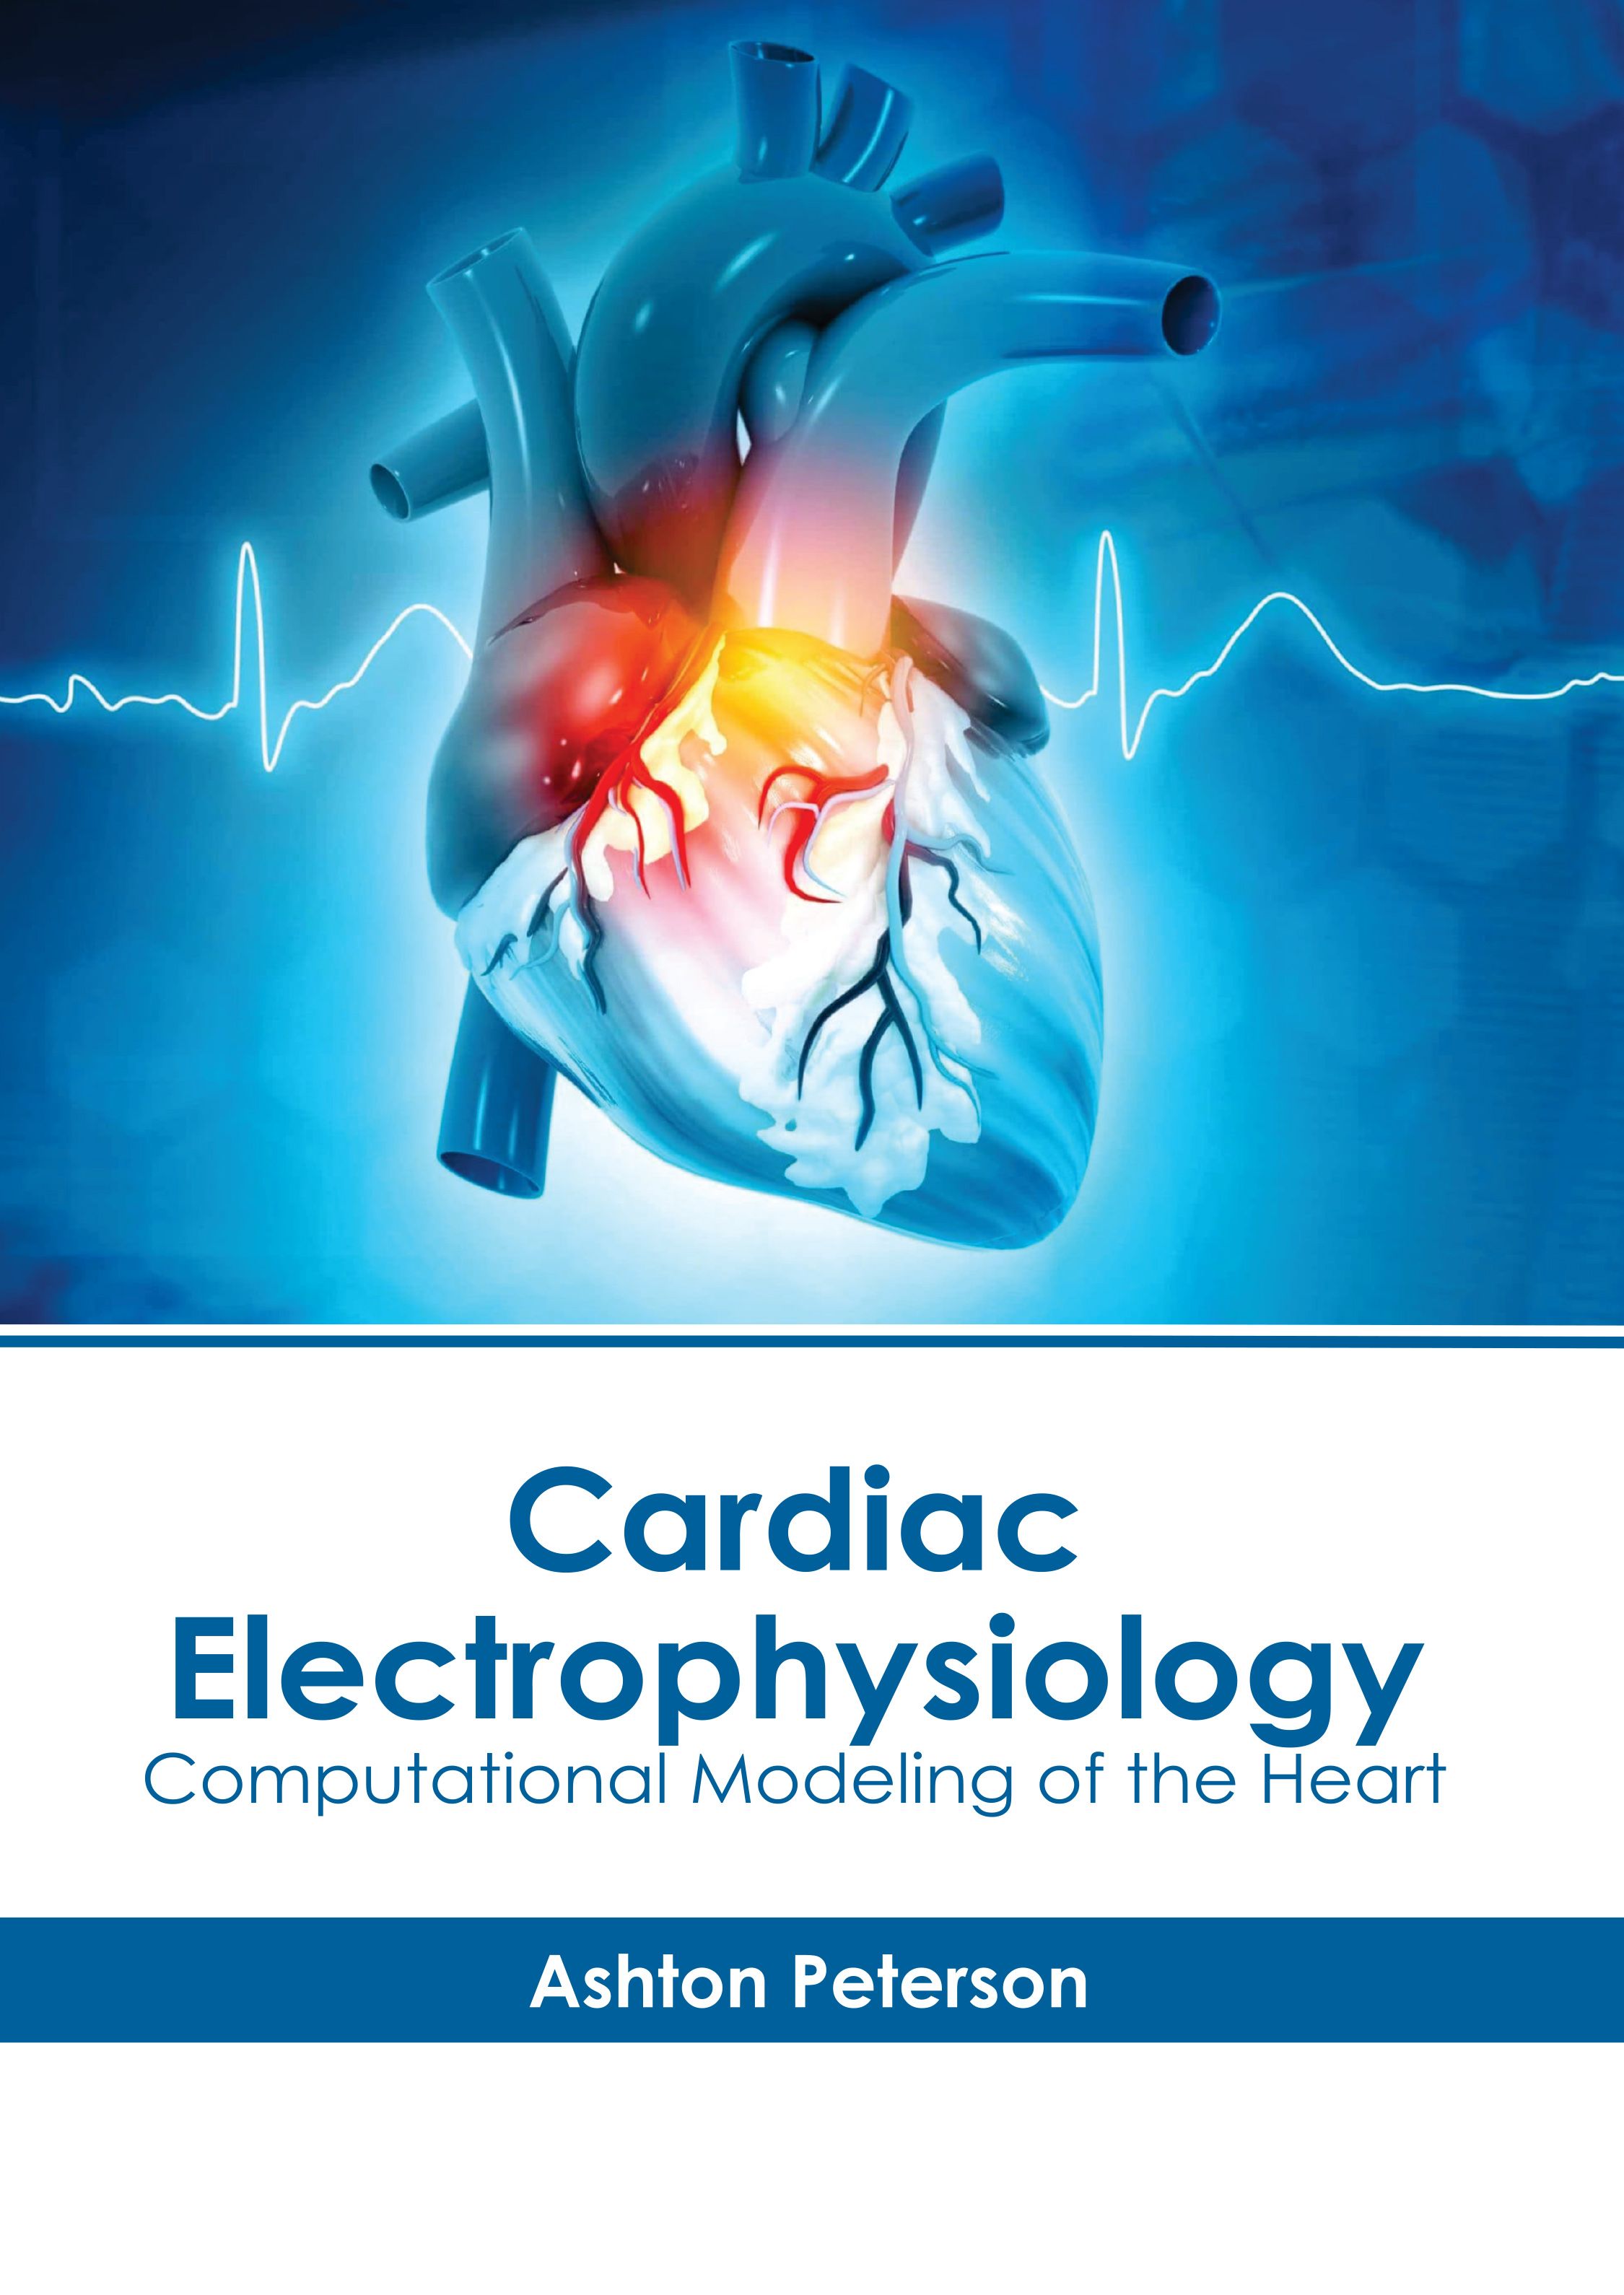 

exclusive-publishers/american-medical-publishers/cardiac-electrophysiology-computational-modeling-of-the-heart-9781639279593